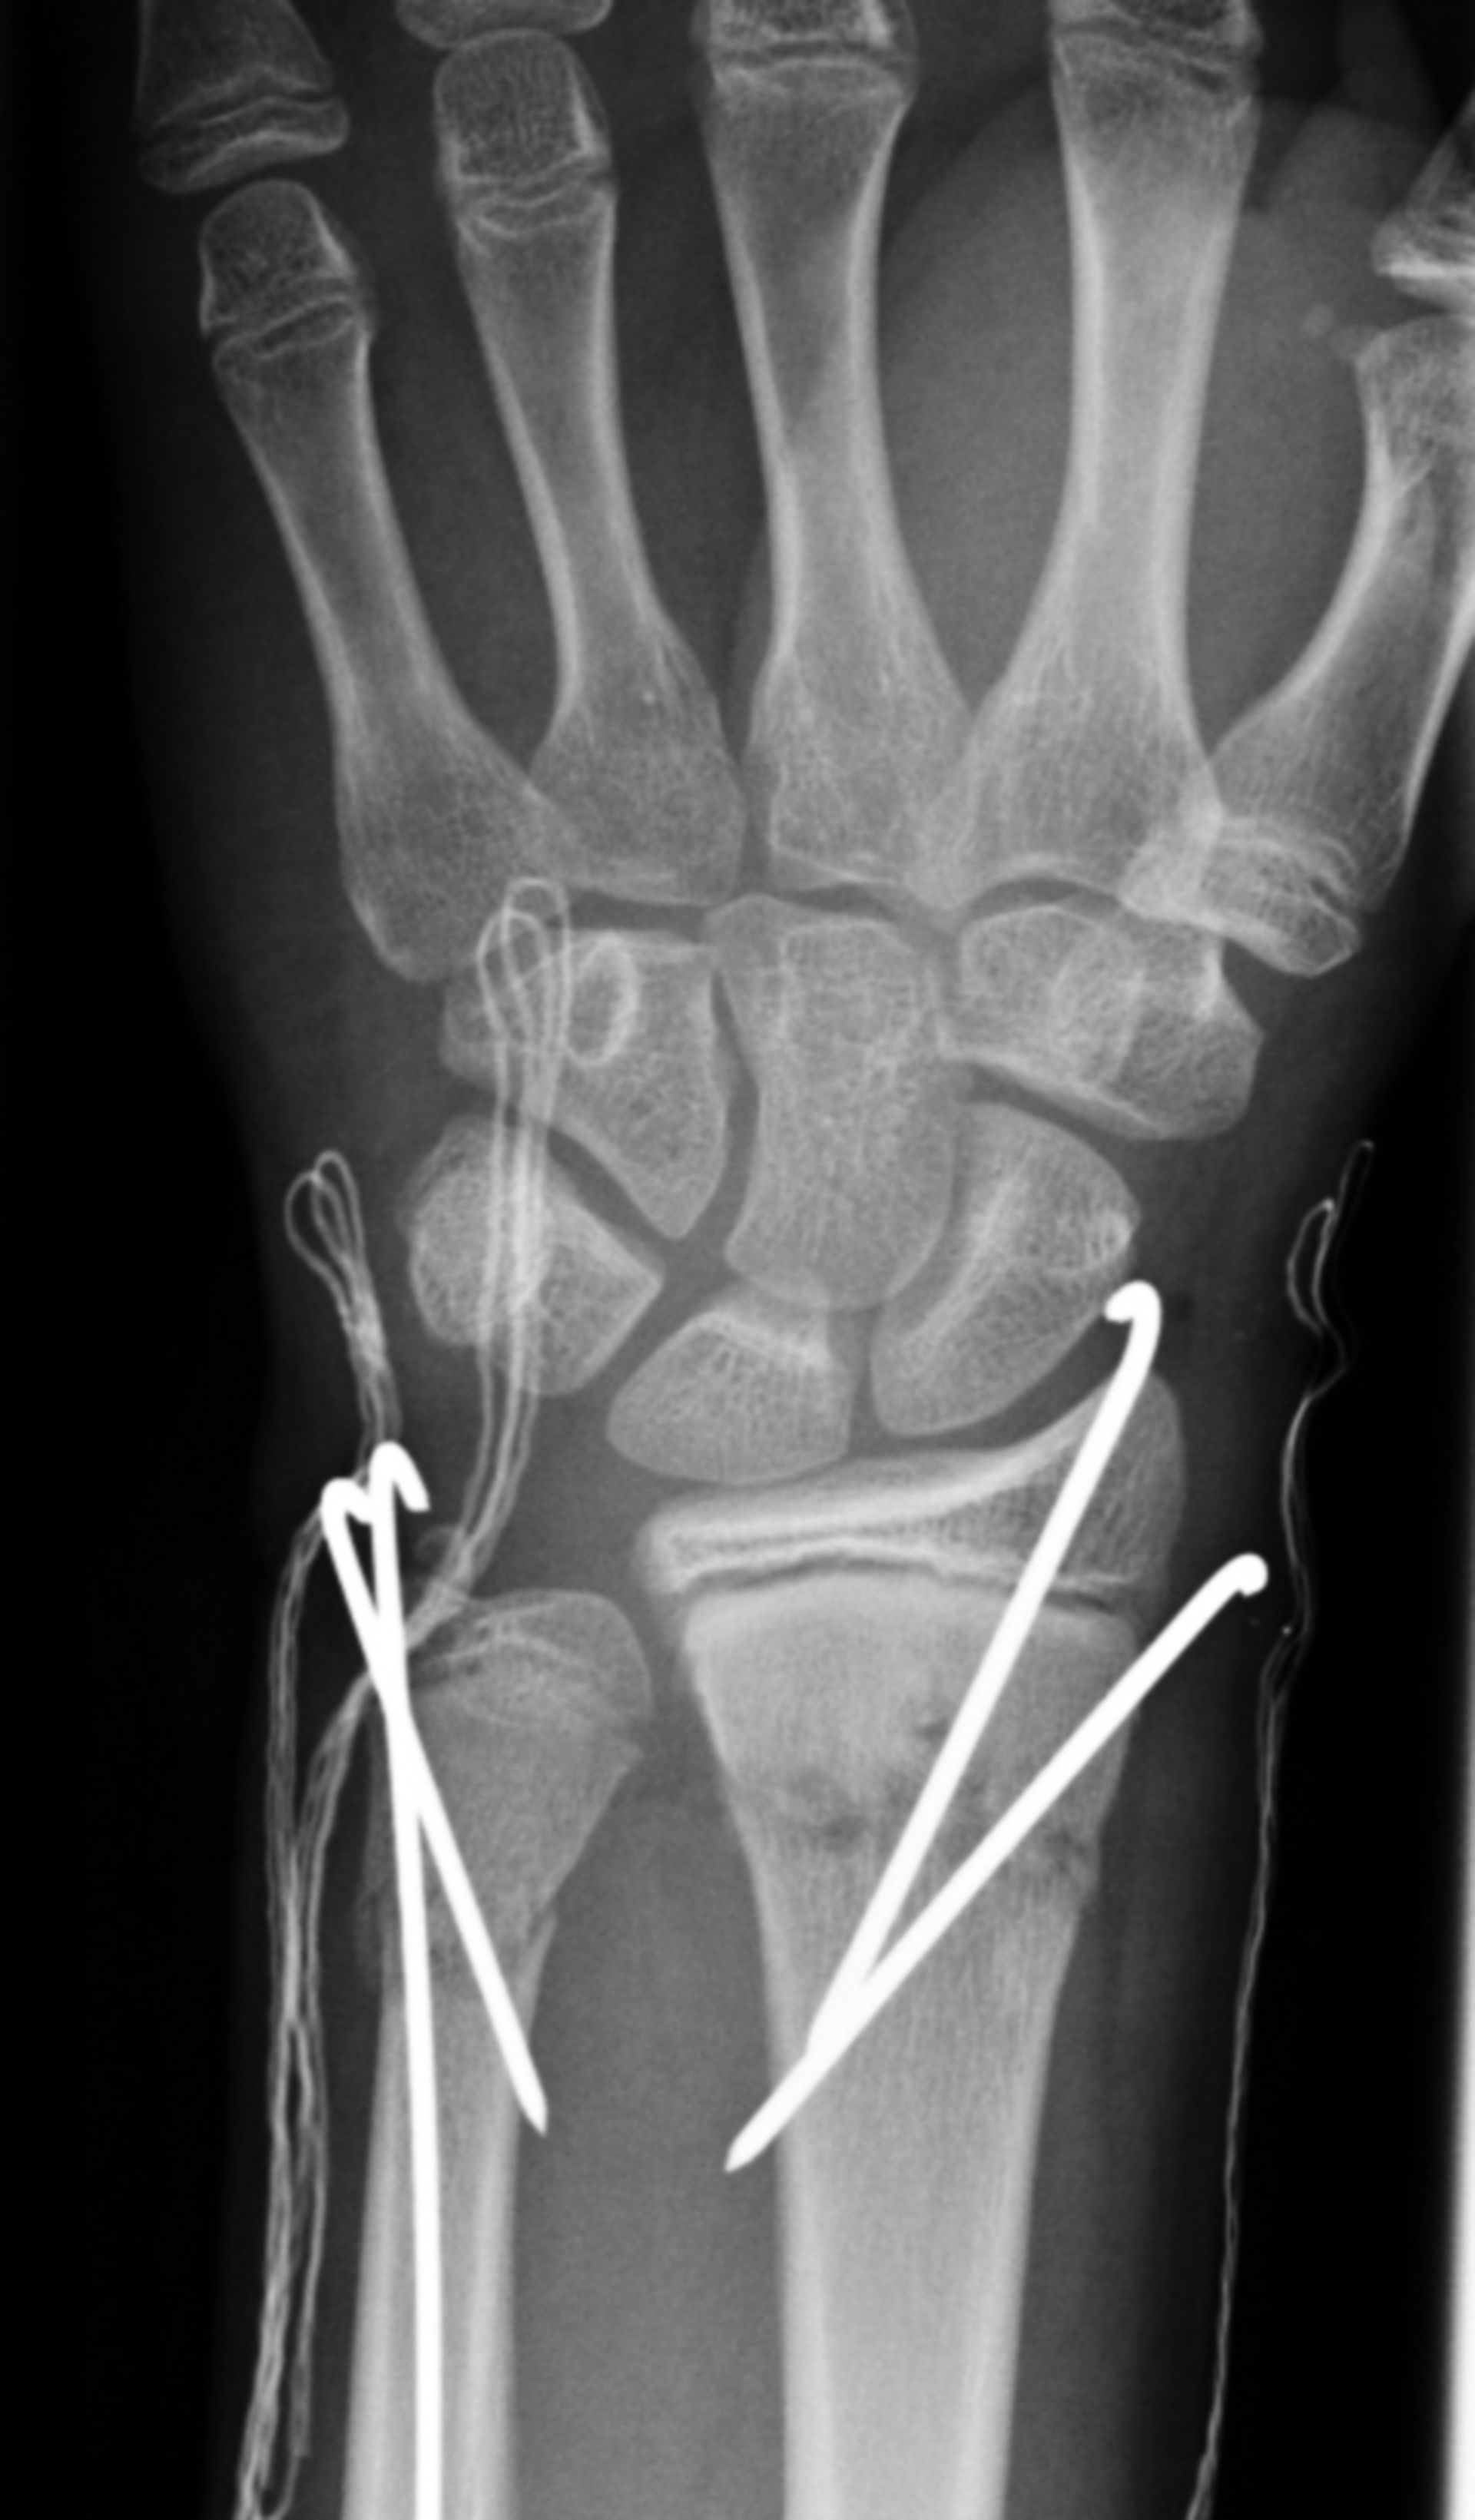 Forearm fracture in a child - Osteosynthesis